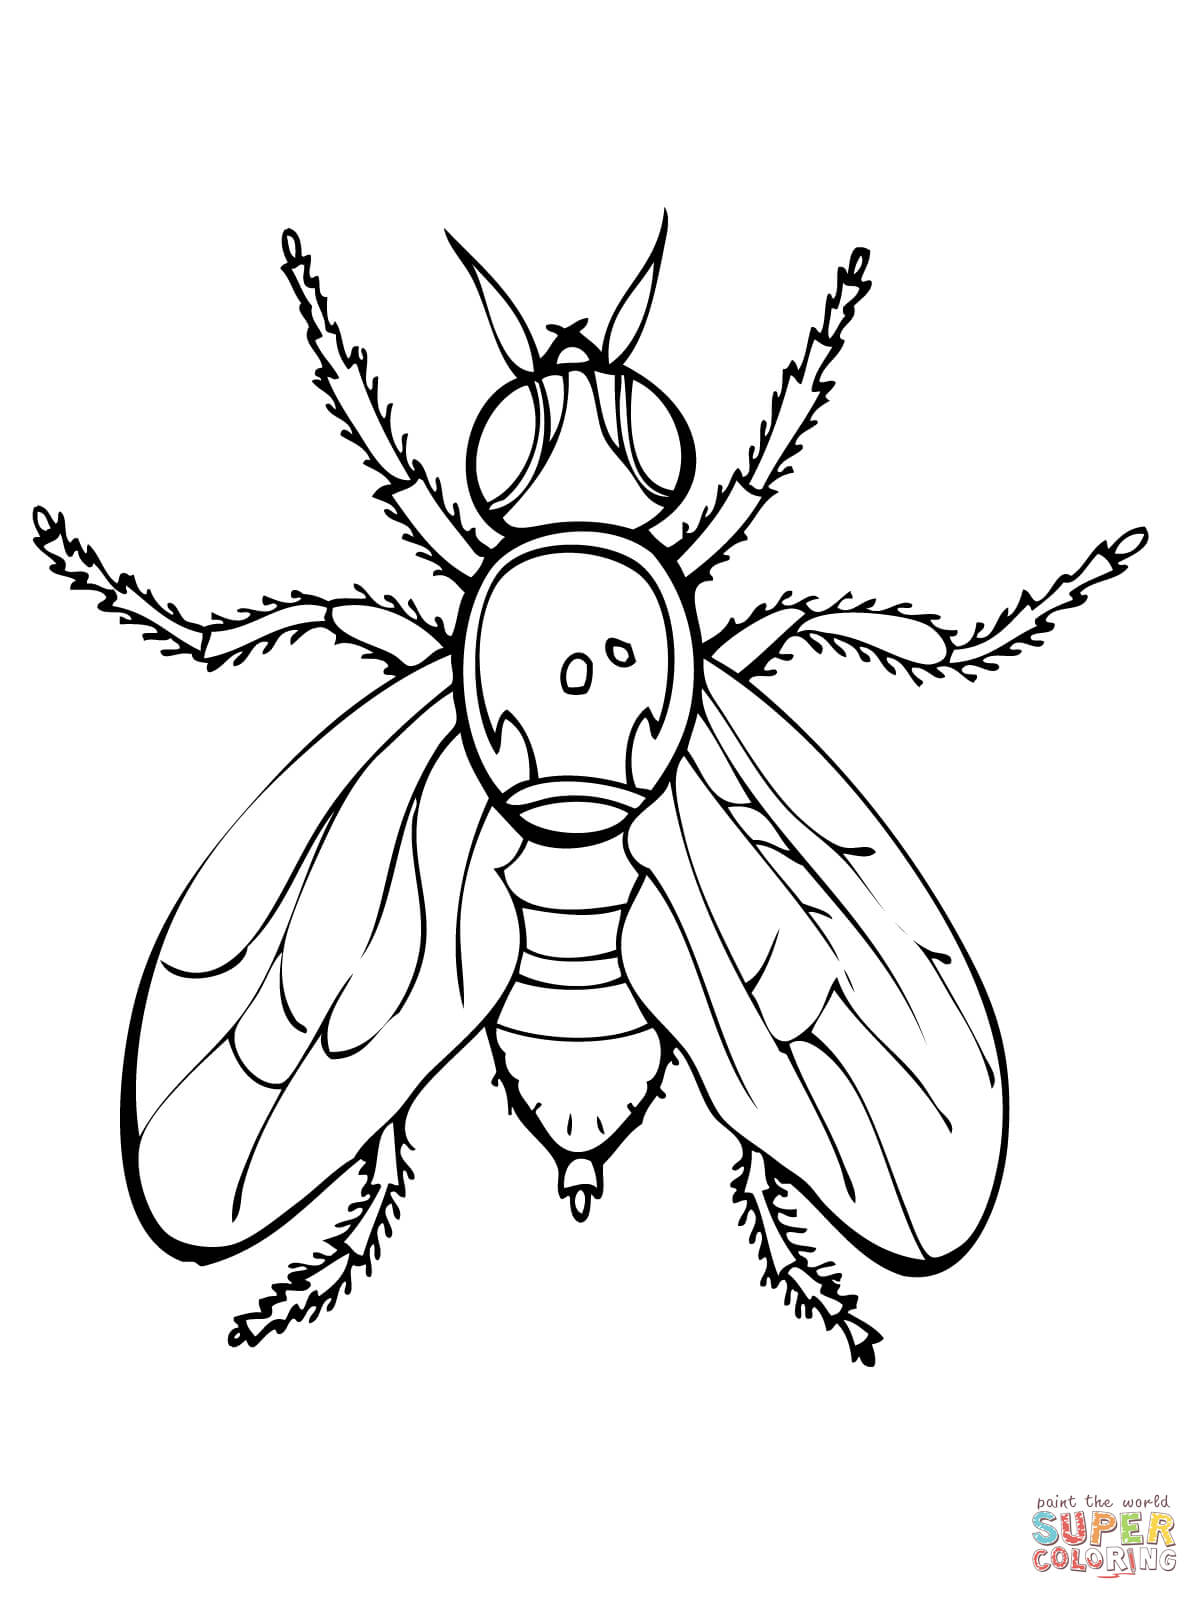 Fruit fly coloring page free printable coloring pages